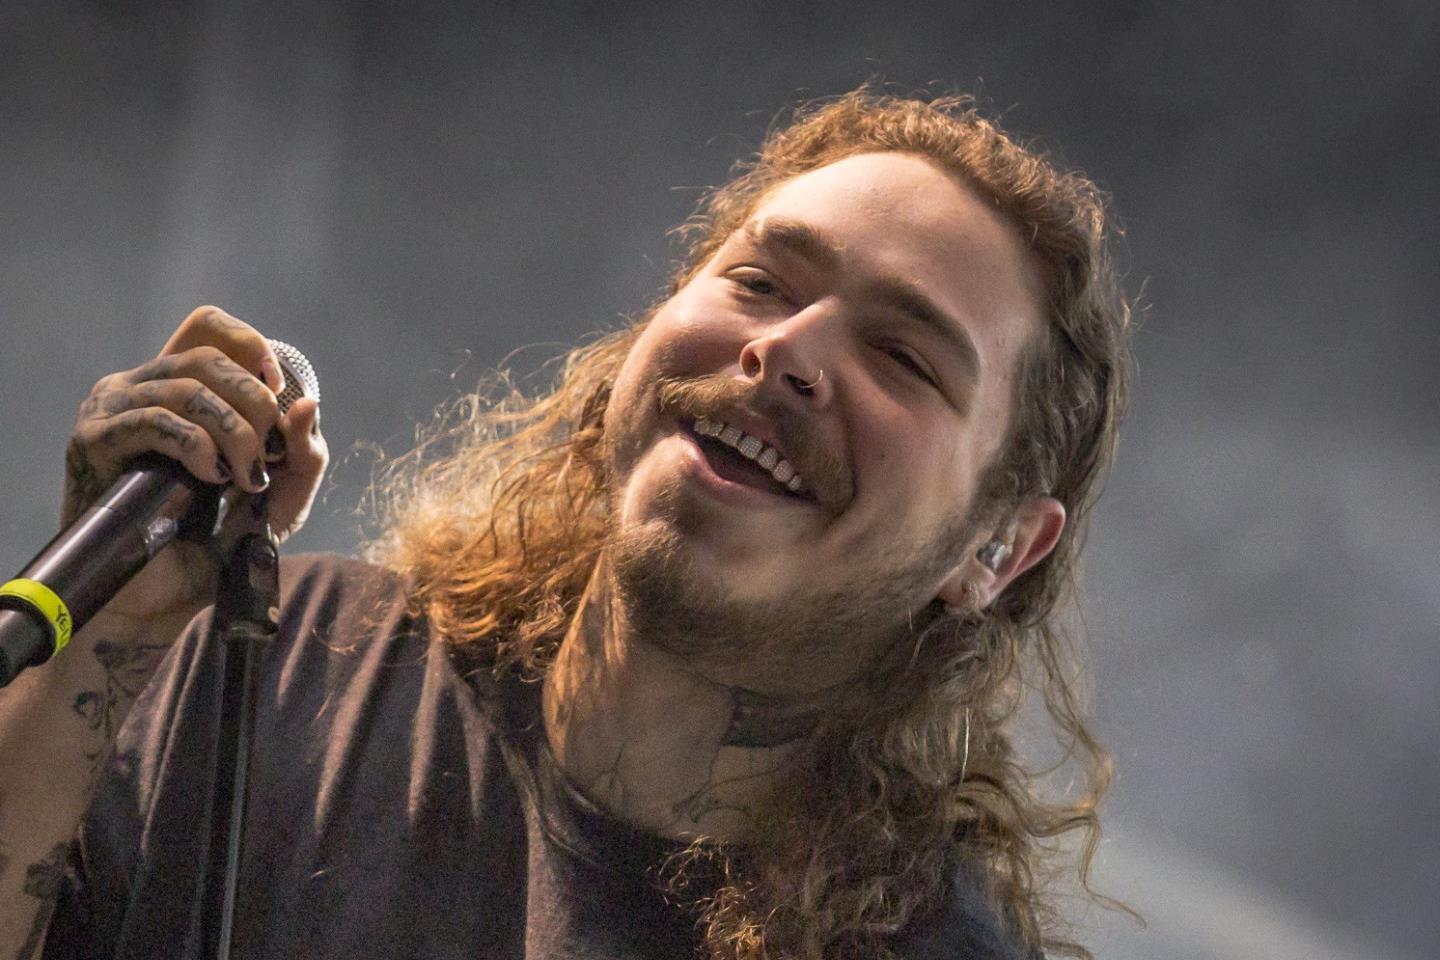 Post Malone Tickets | Post Malone Tour Dates 2022 and Concert Tickets ...